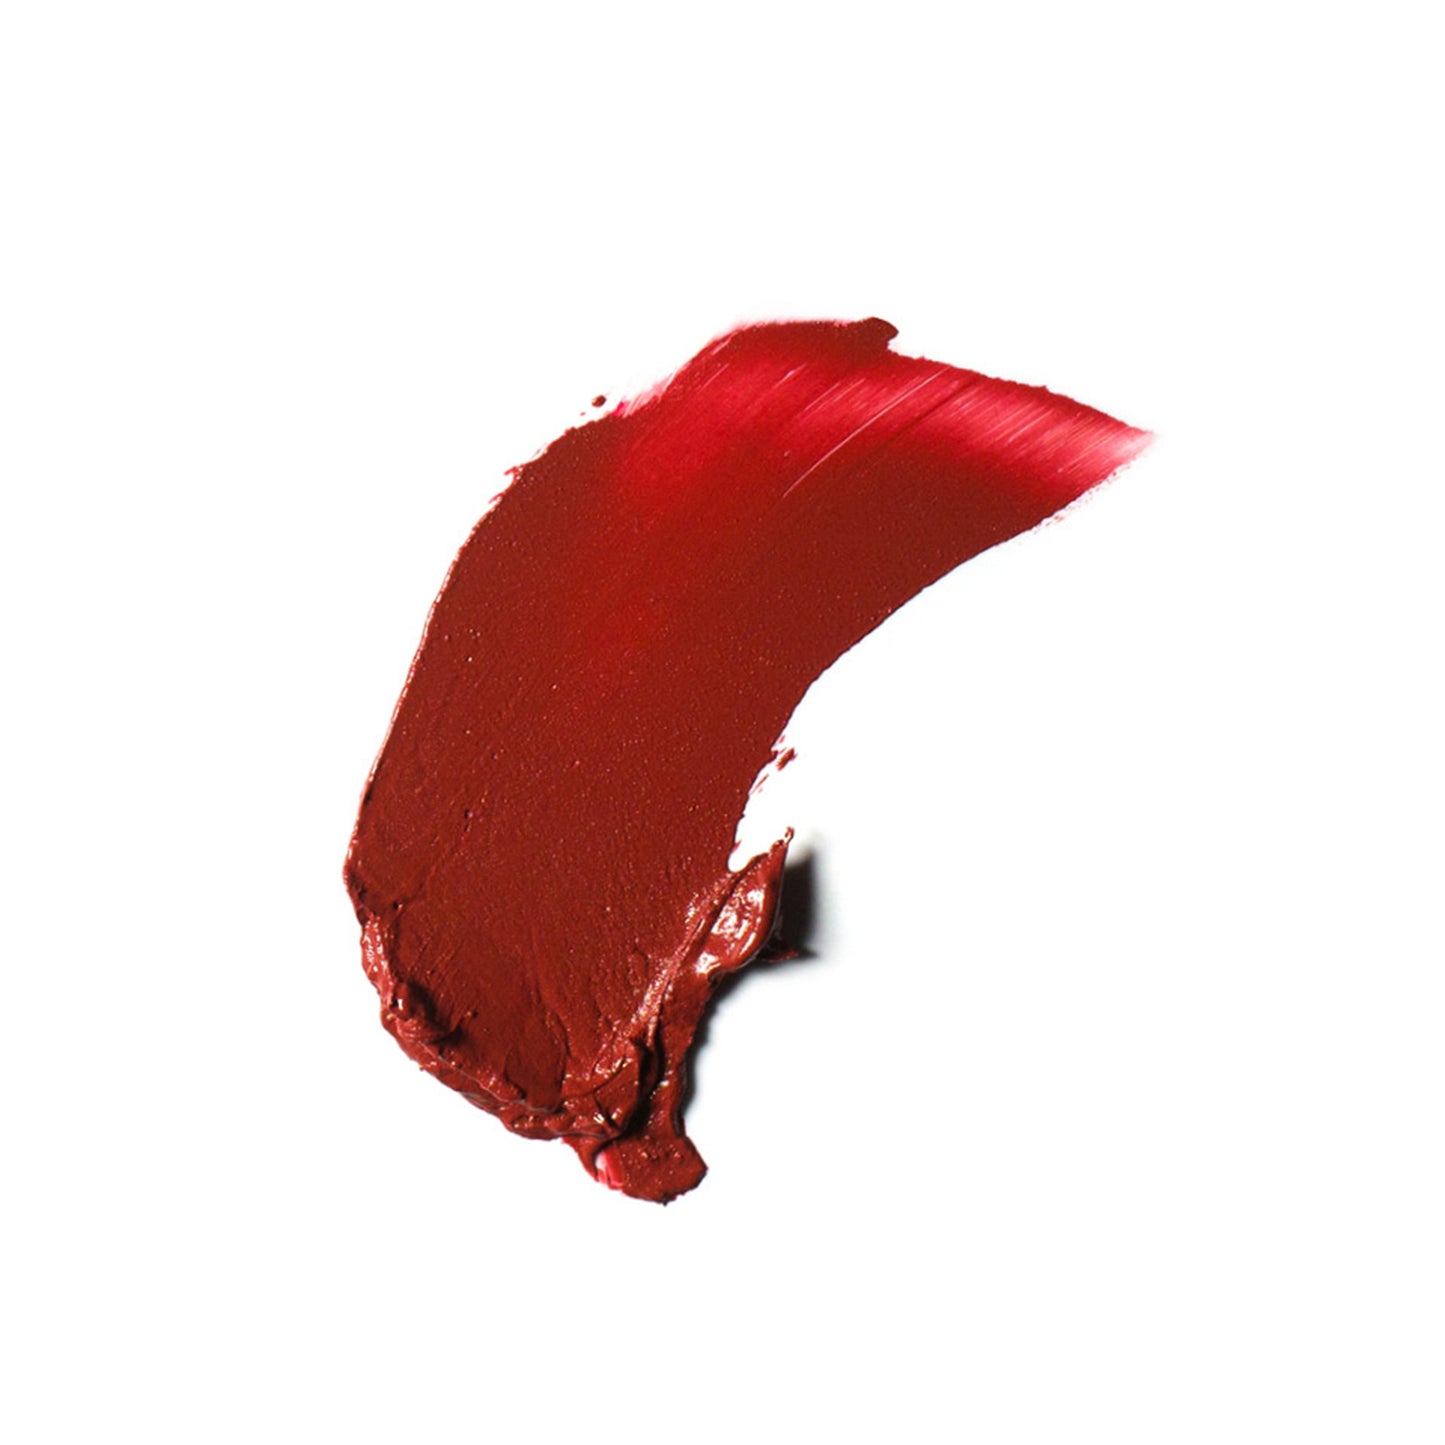 A swatch of the Ere Perez Carrot Colour Pot cream blush in Happy, a rich brick red shade. 